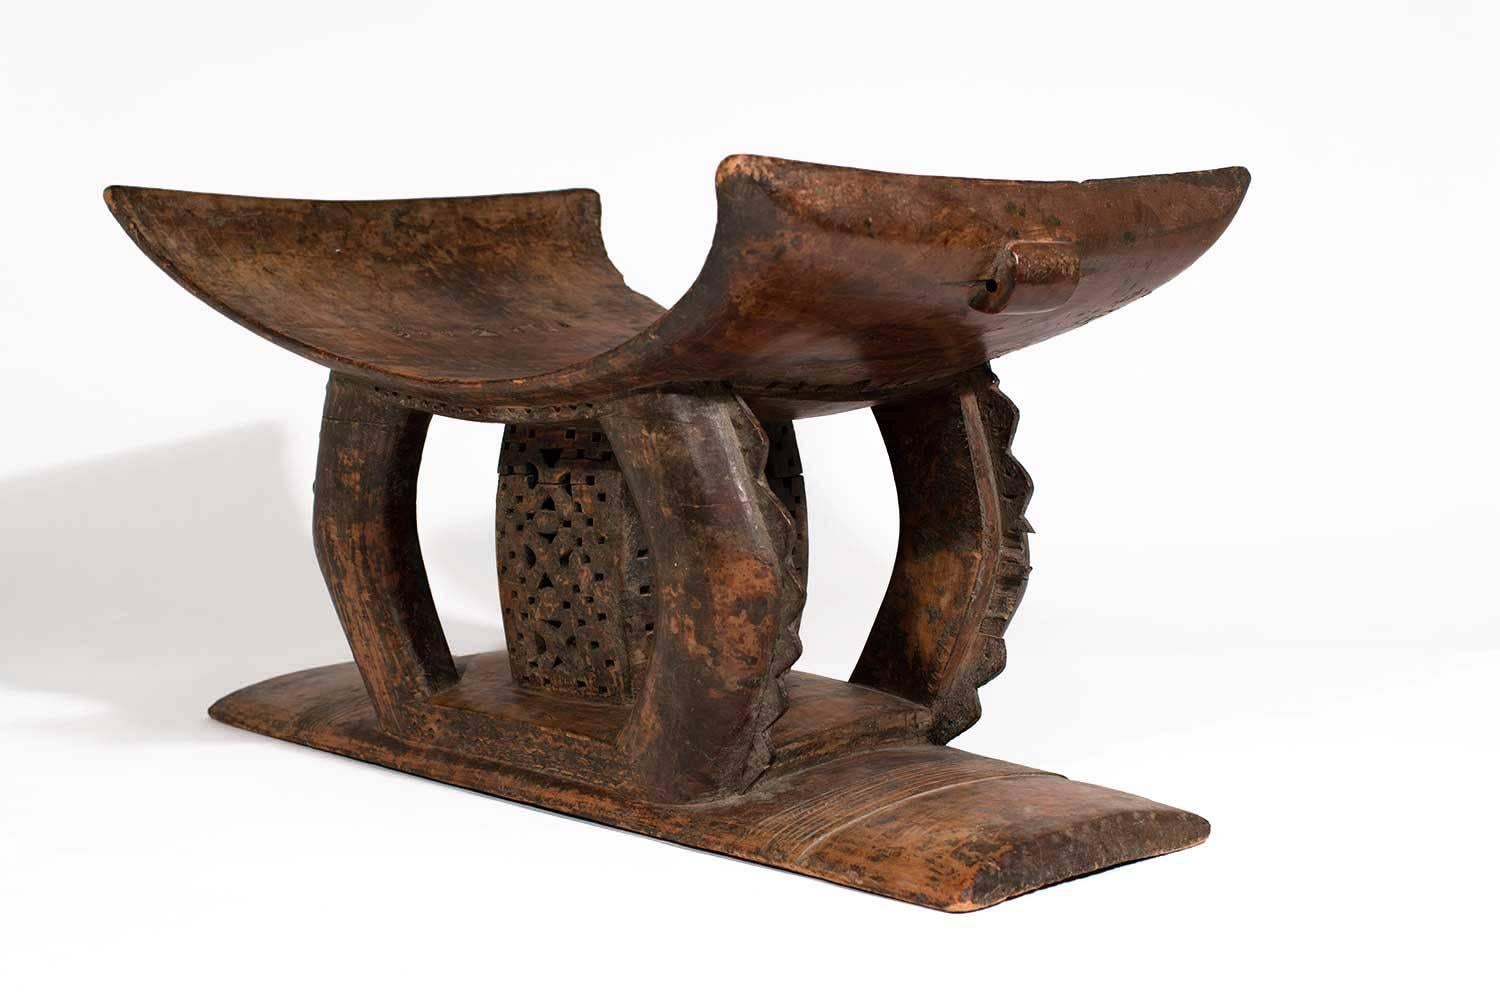 Stools indicate status, power and a succession of Ghanian chiefs and kings. Carved from single blocks, Asante (or Ashanti) stool's traditionally have crescent-shaped seats, flat bases, and complex support structures, which exist in many designs with